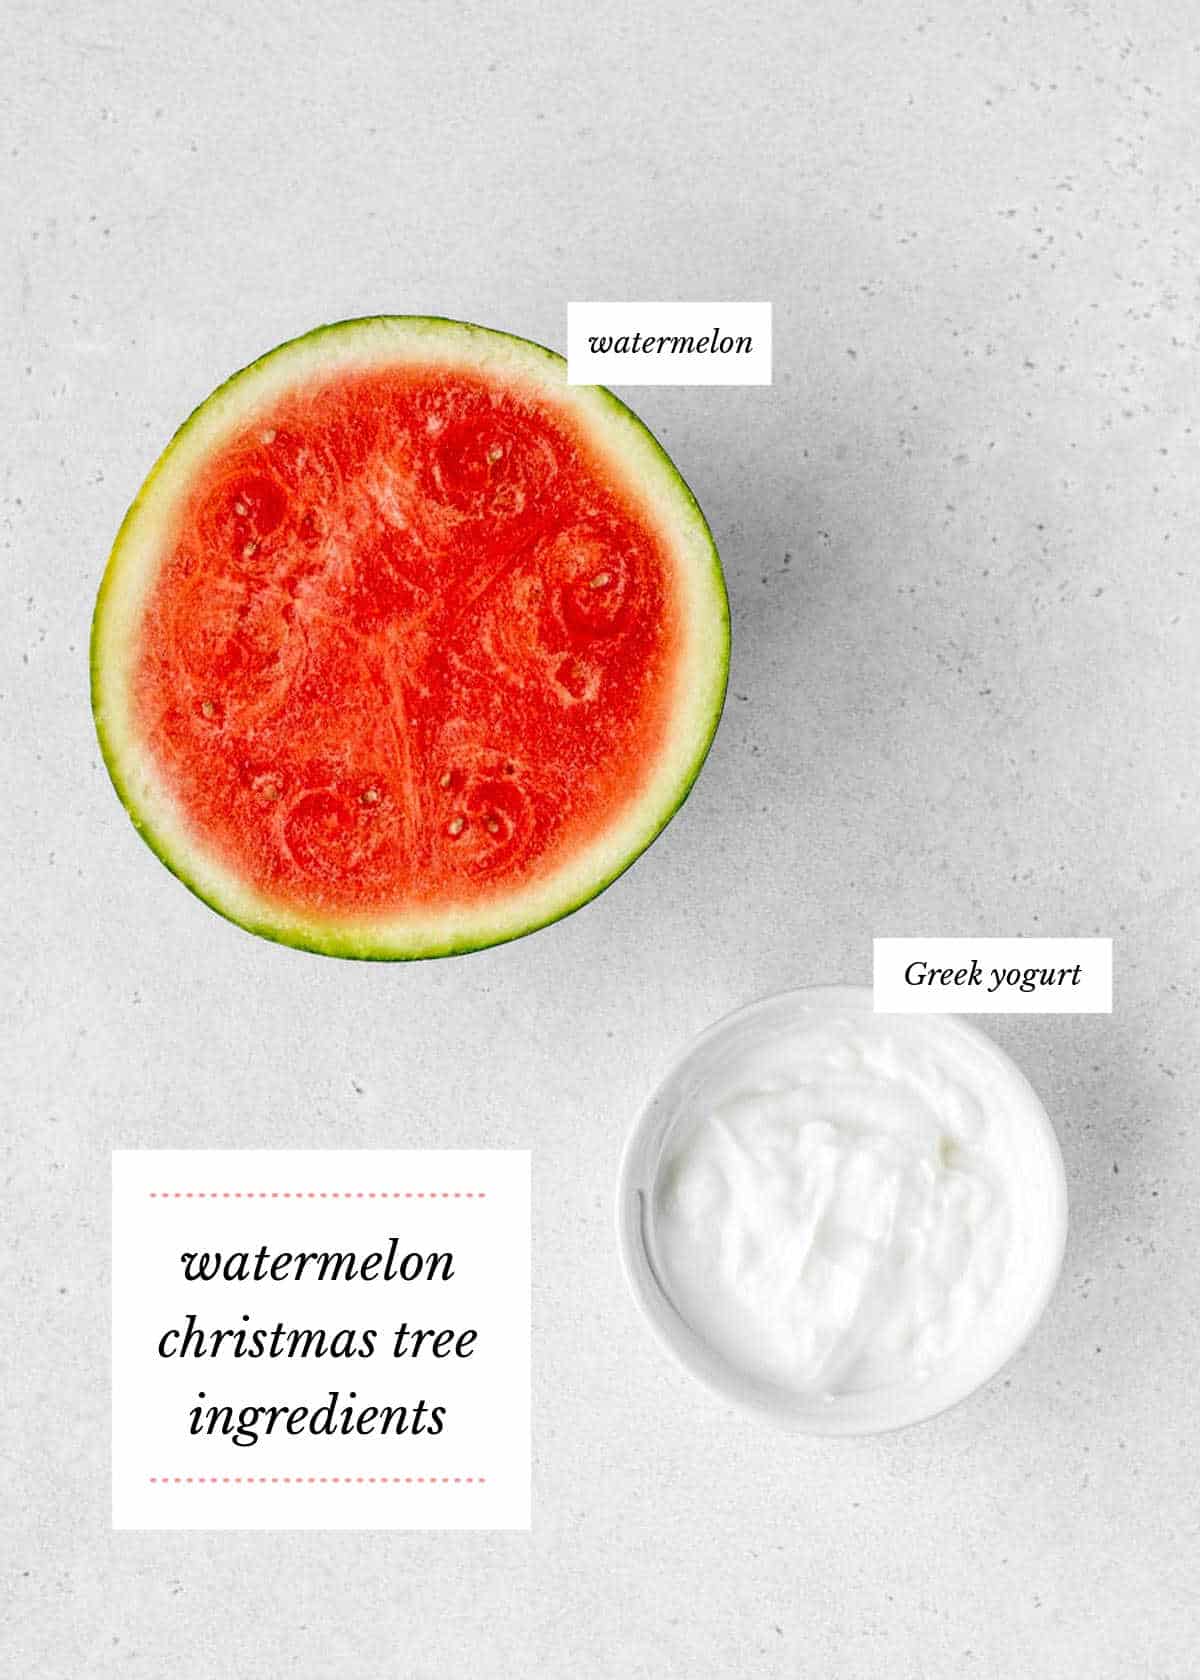 The ingredients for Watermelon Christmas trees, including watermelon and Greek yogurt.